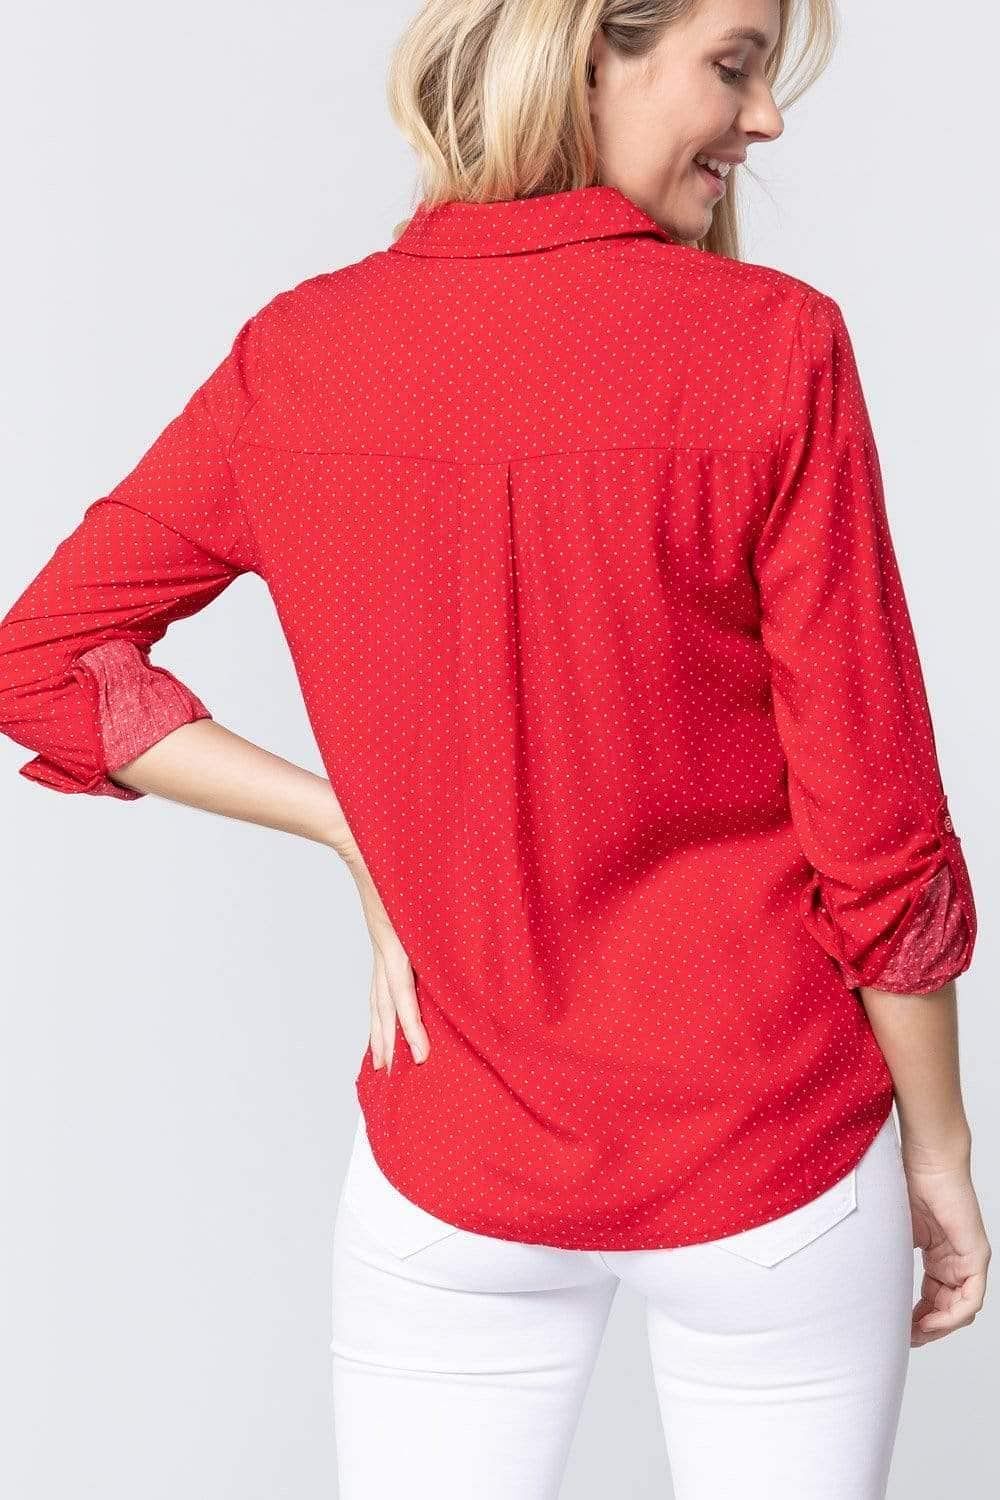 Red Roll Up Sleeve Polka Dot Shirt - Shopping Therapy Shirt